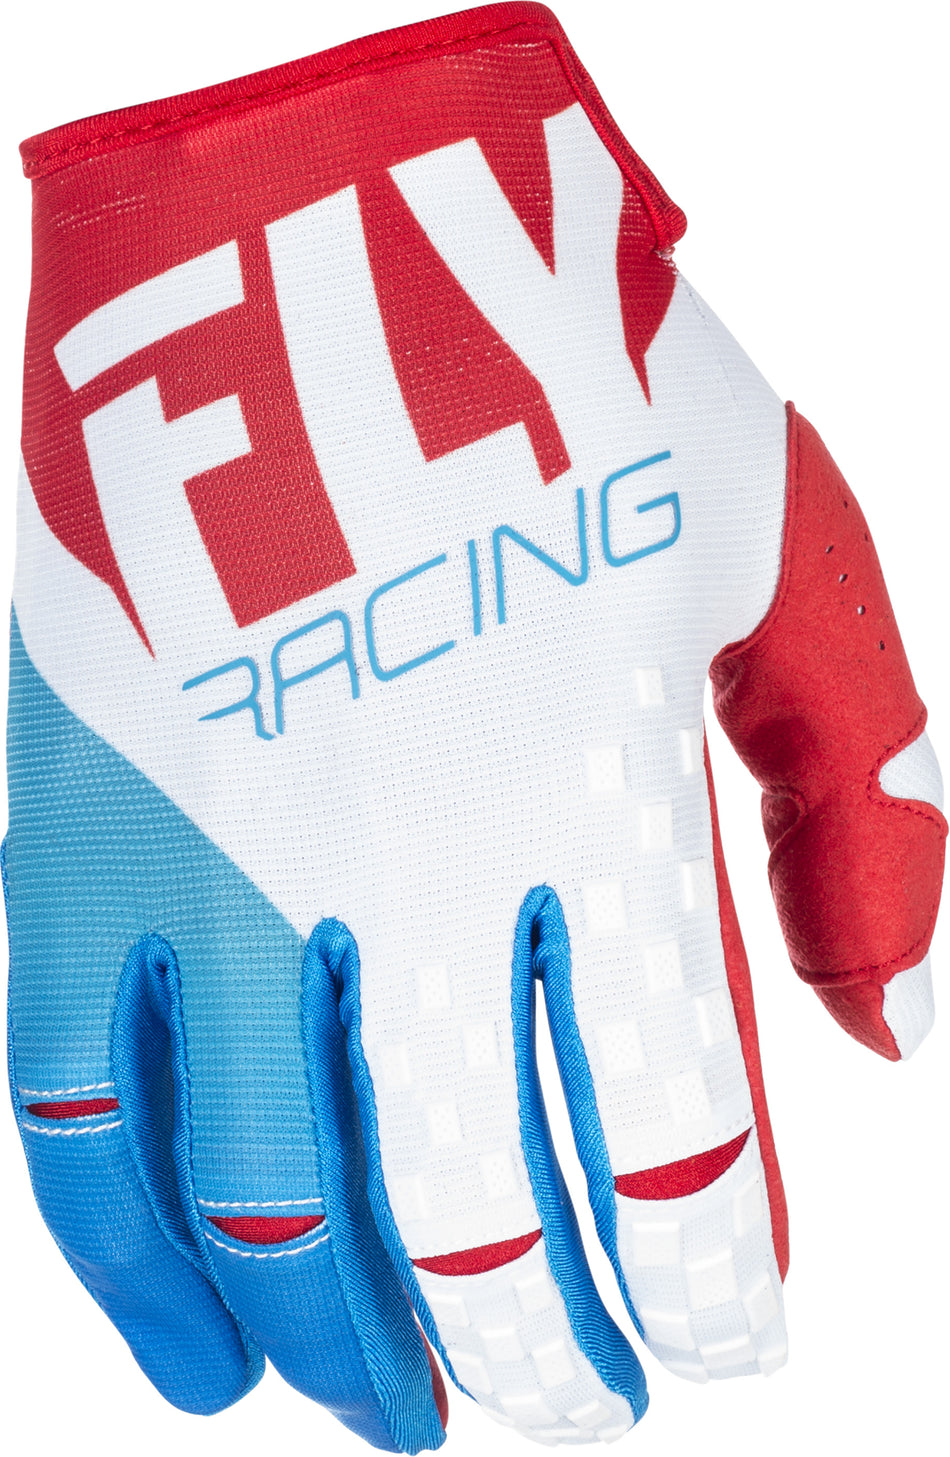 FLY RACING Kinetic Gloves Red/White/Blue Sz 4 371-41304